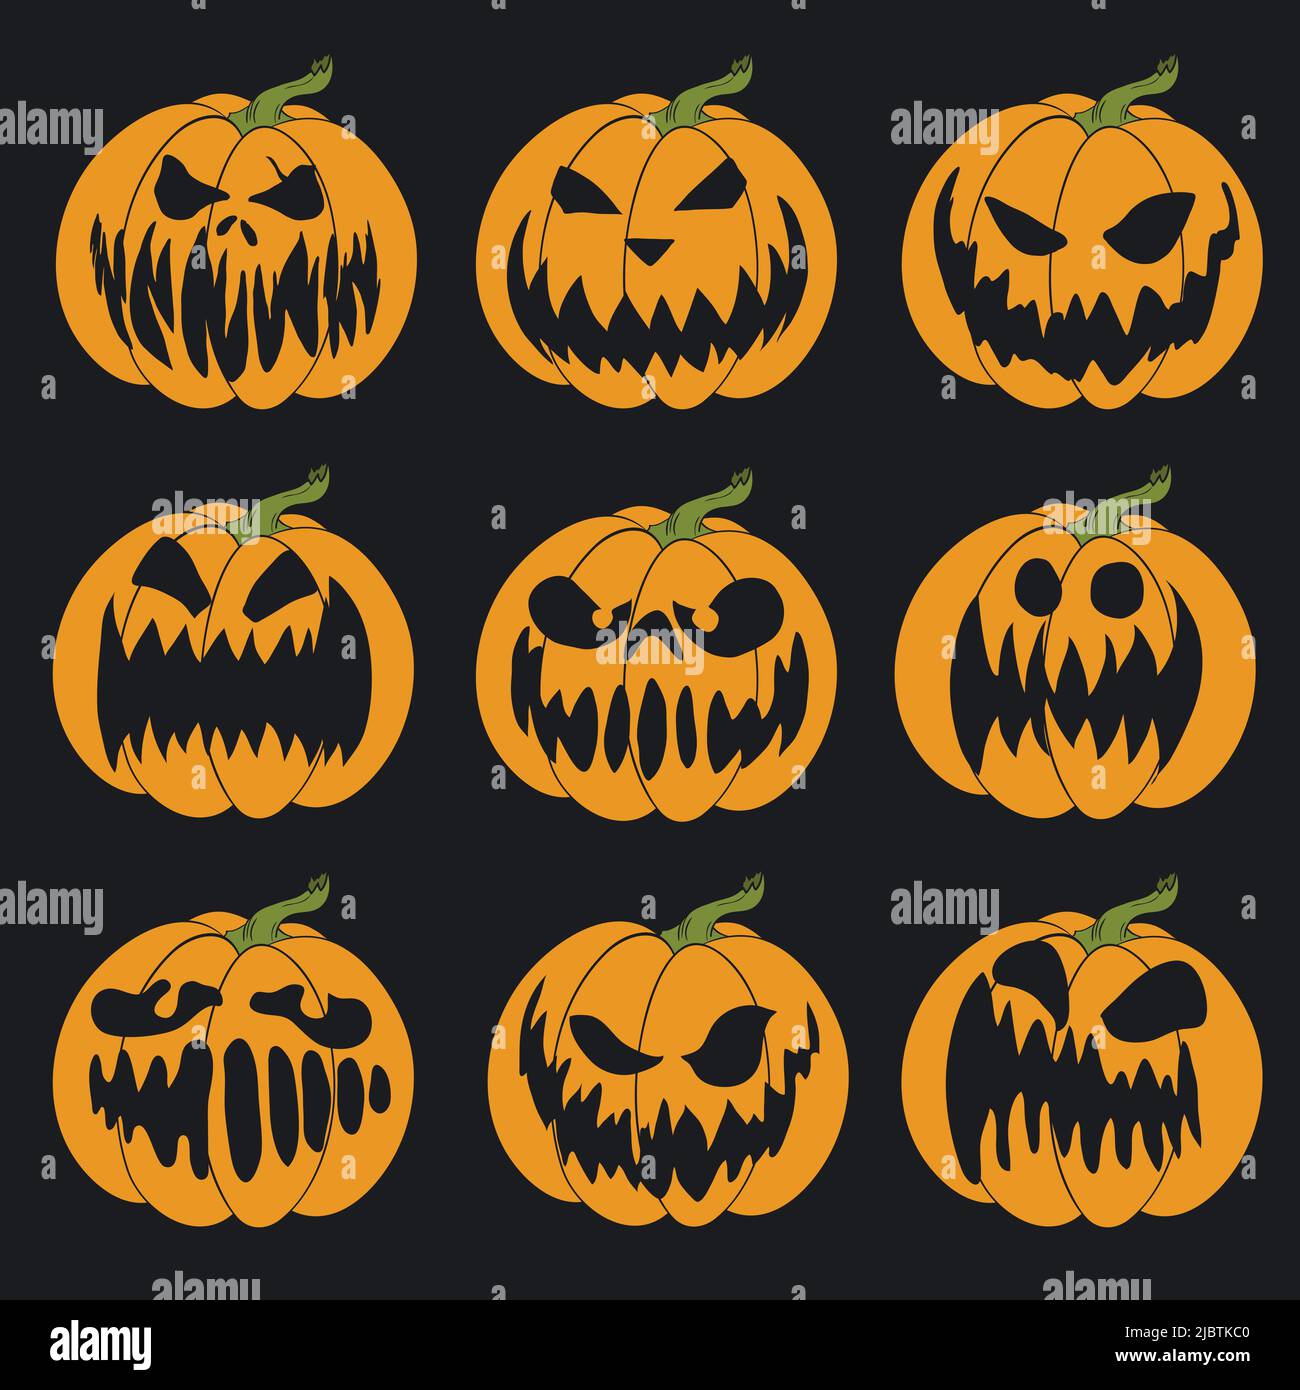 Halloween stencil. Vector illustration of Jack-o'-lantern for cards, banners, stickers, flyers. Colored set of pumpkin's faces on black background. Stock Vector